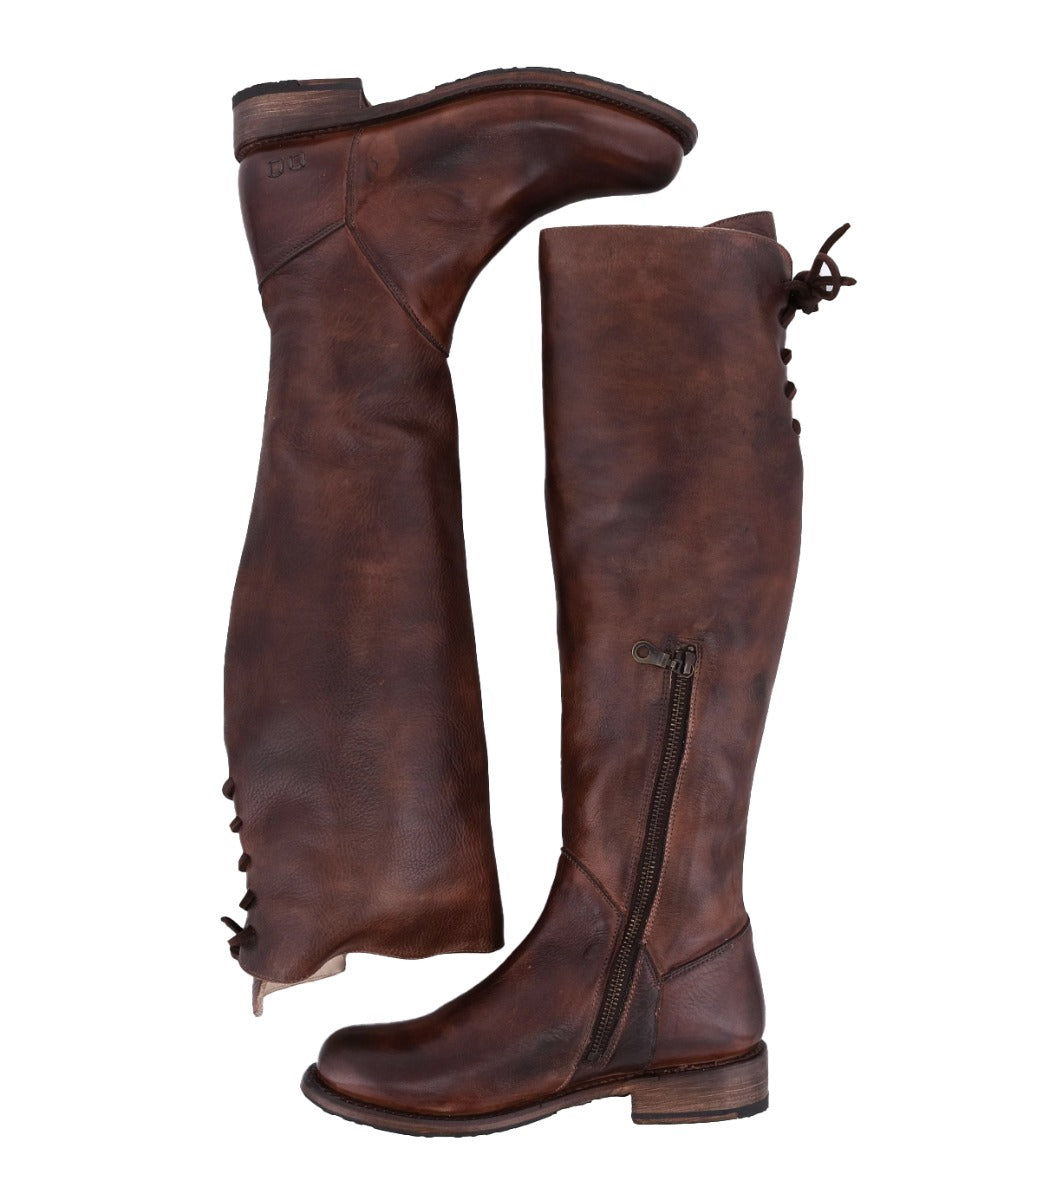 A pair of Bed Stu Manchester women's brown leather boots.